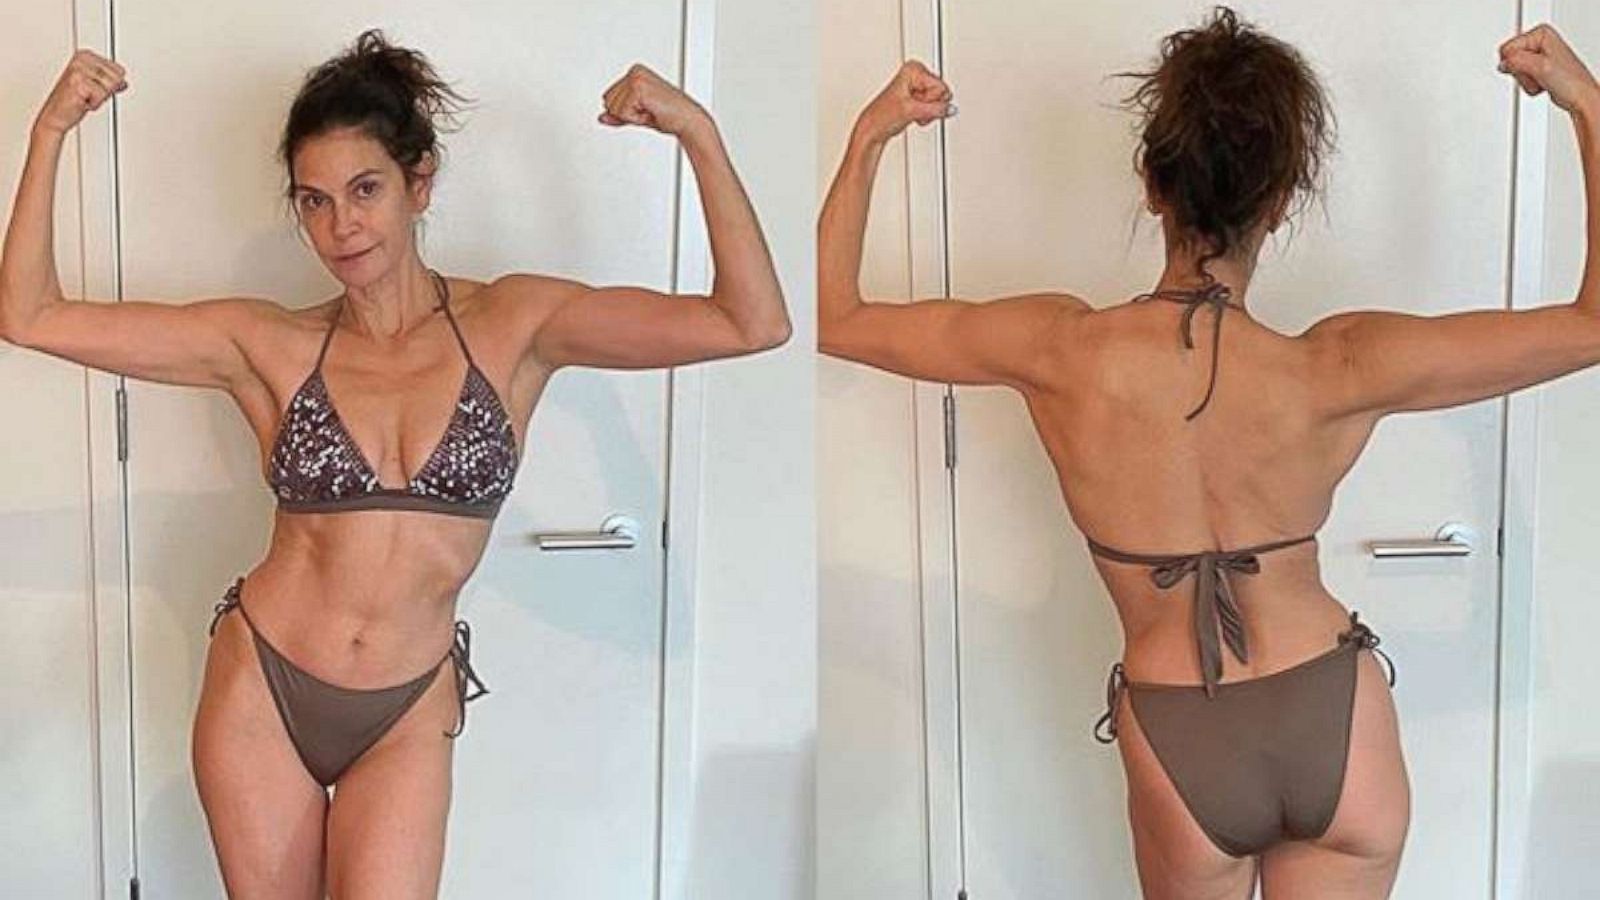 Teri Hatcher shares photo to make a point about aging and loving your body  image